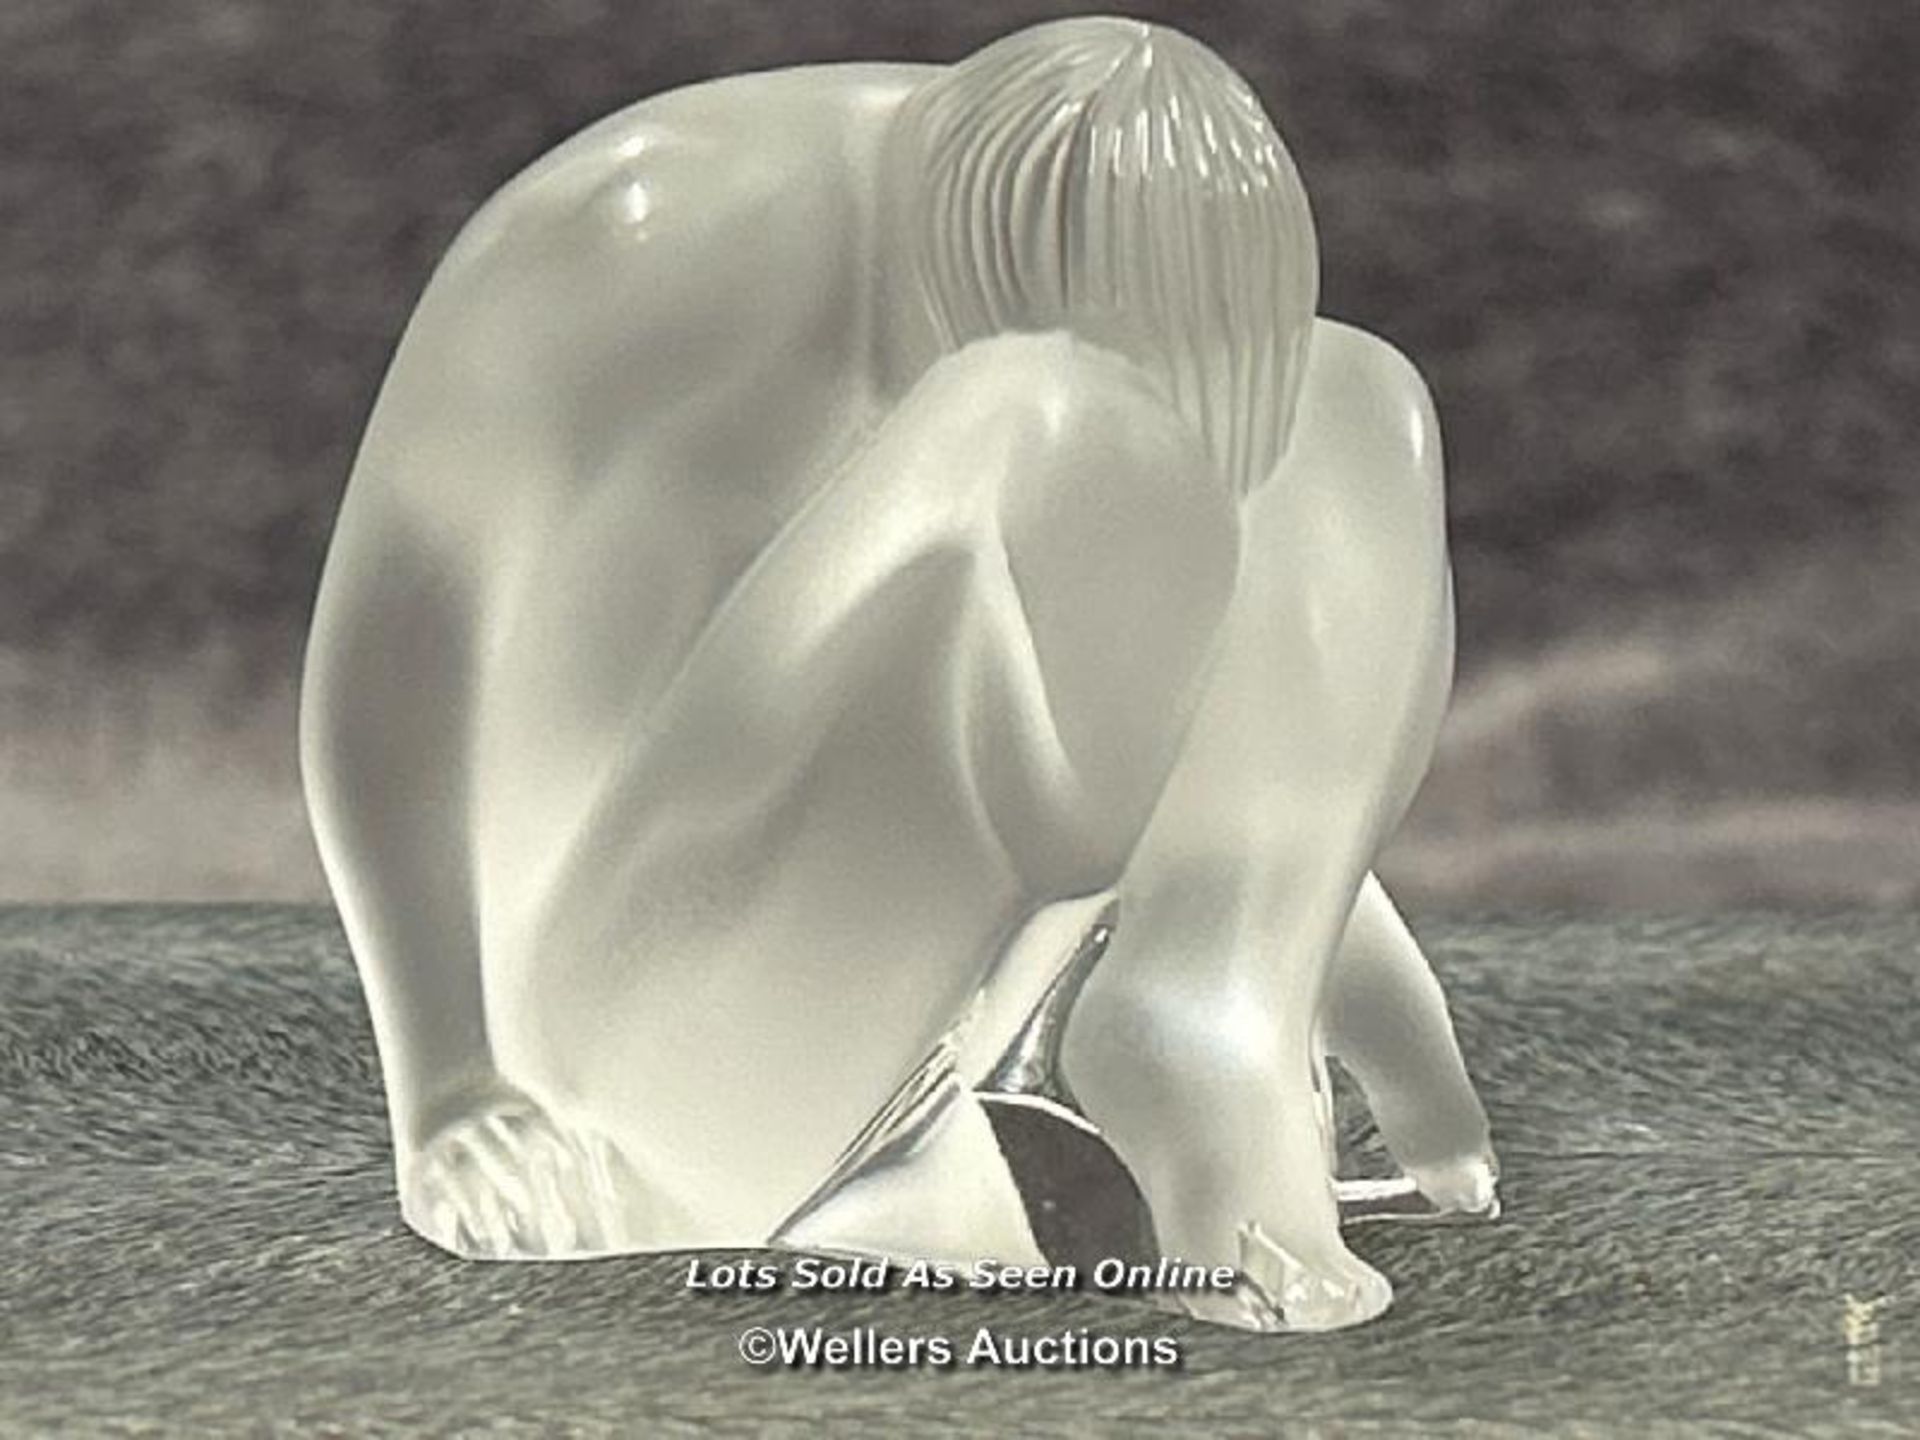 Lalique frosted crystal figurine 'Nahbi', 6cm high, signed (damaged foot) / AN2